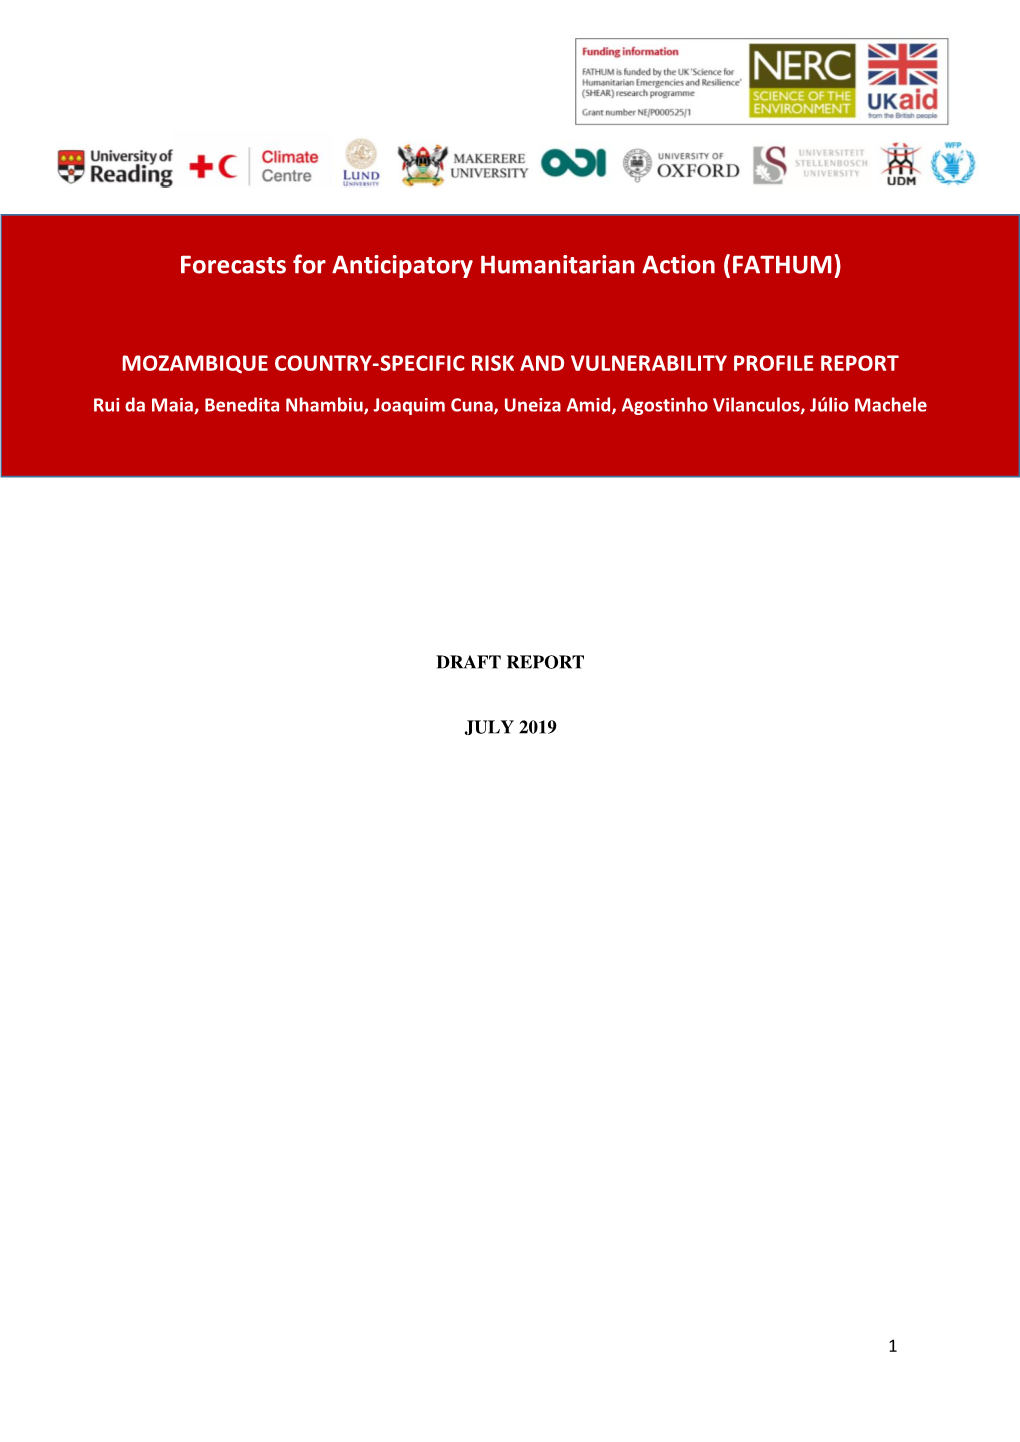 Forecasts for Anticipatory Humanitarian Action (FATHUM)